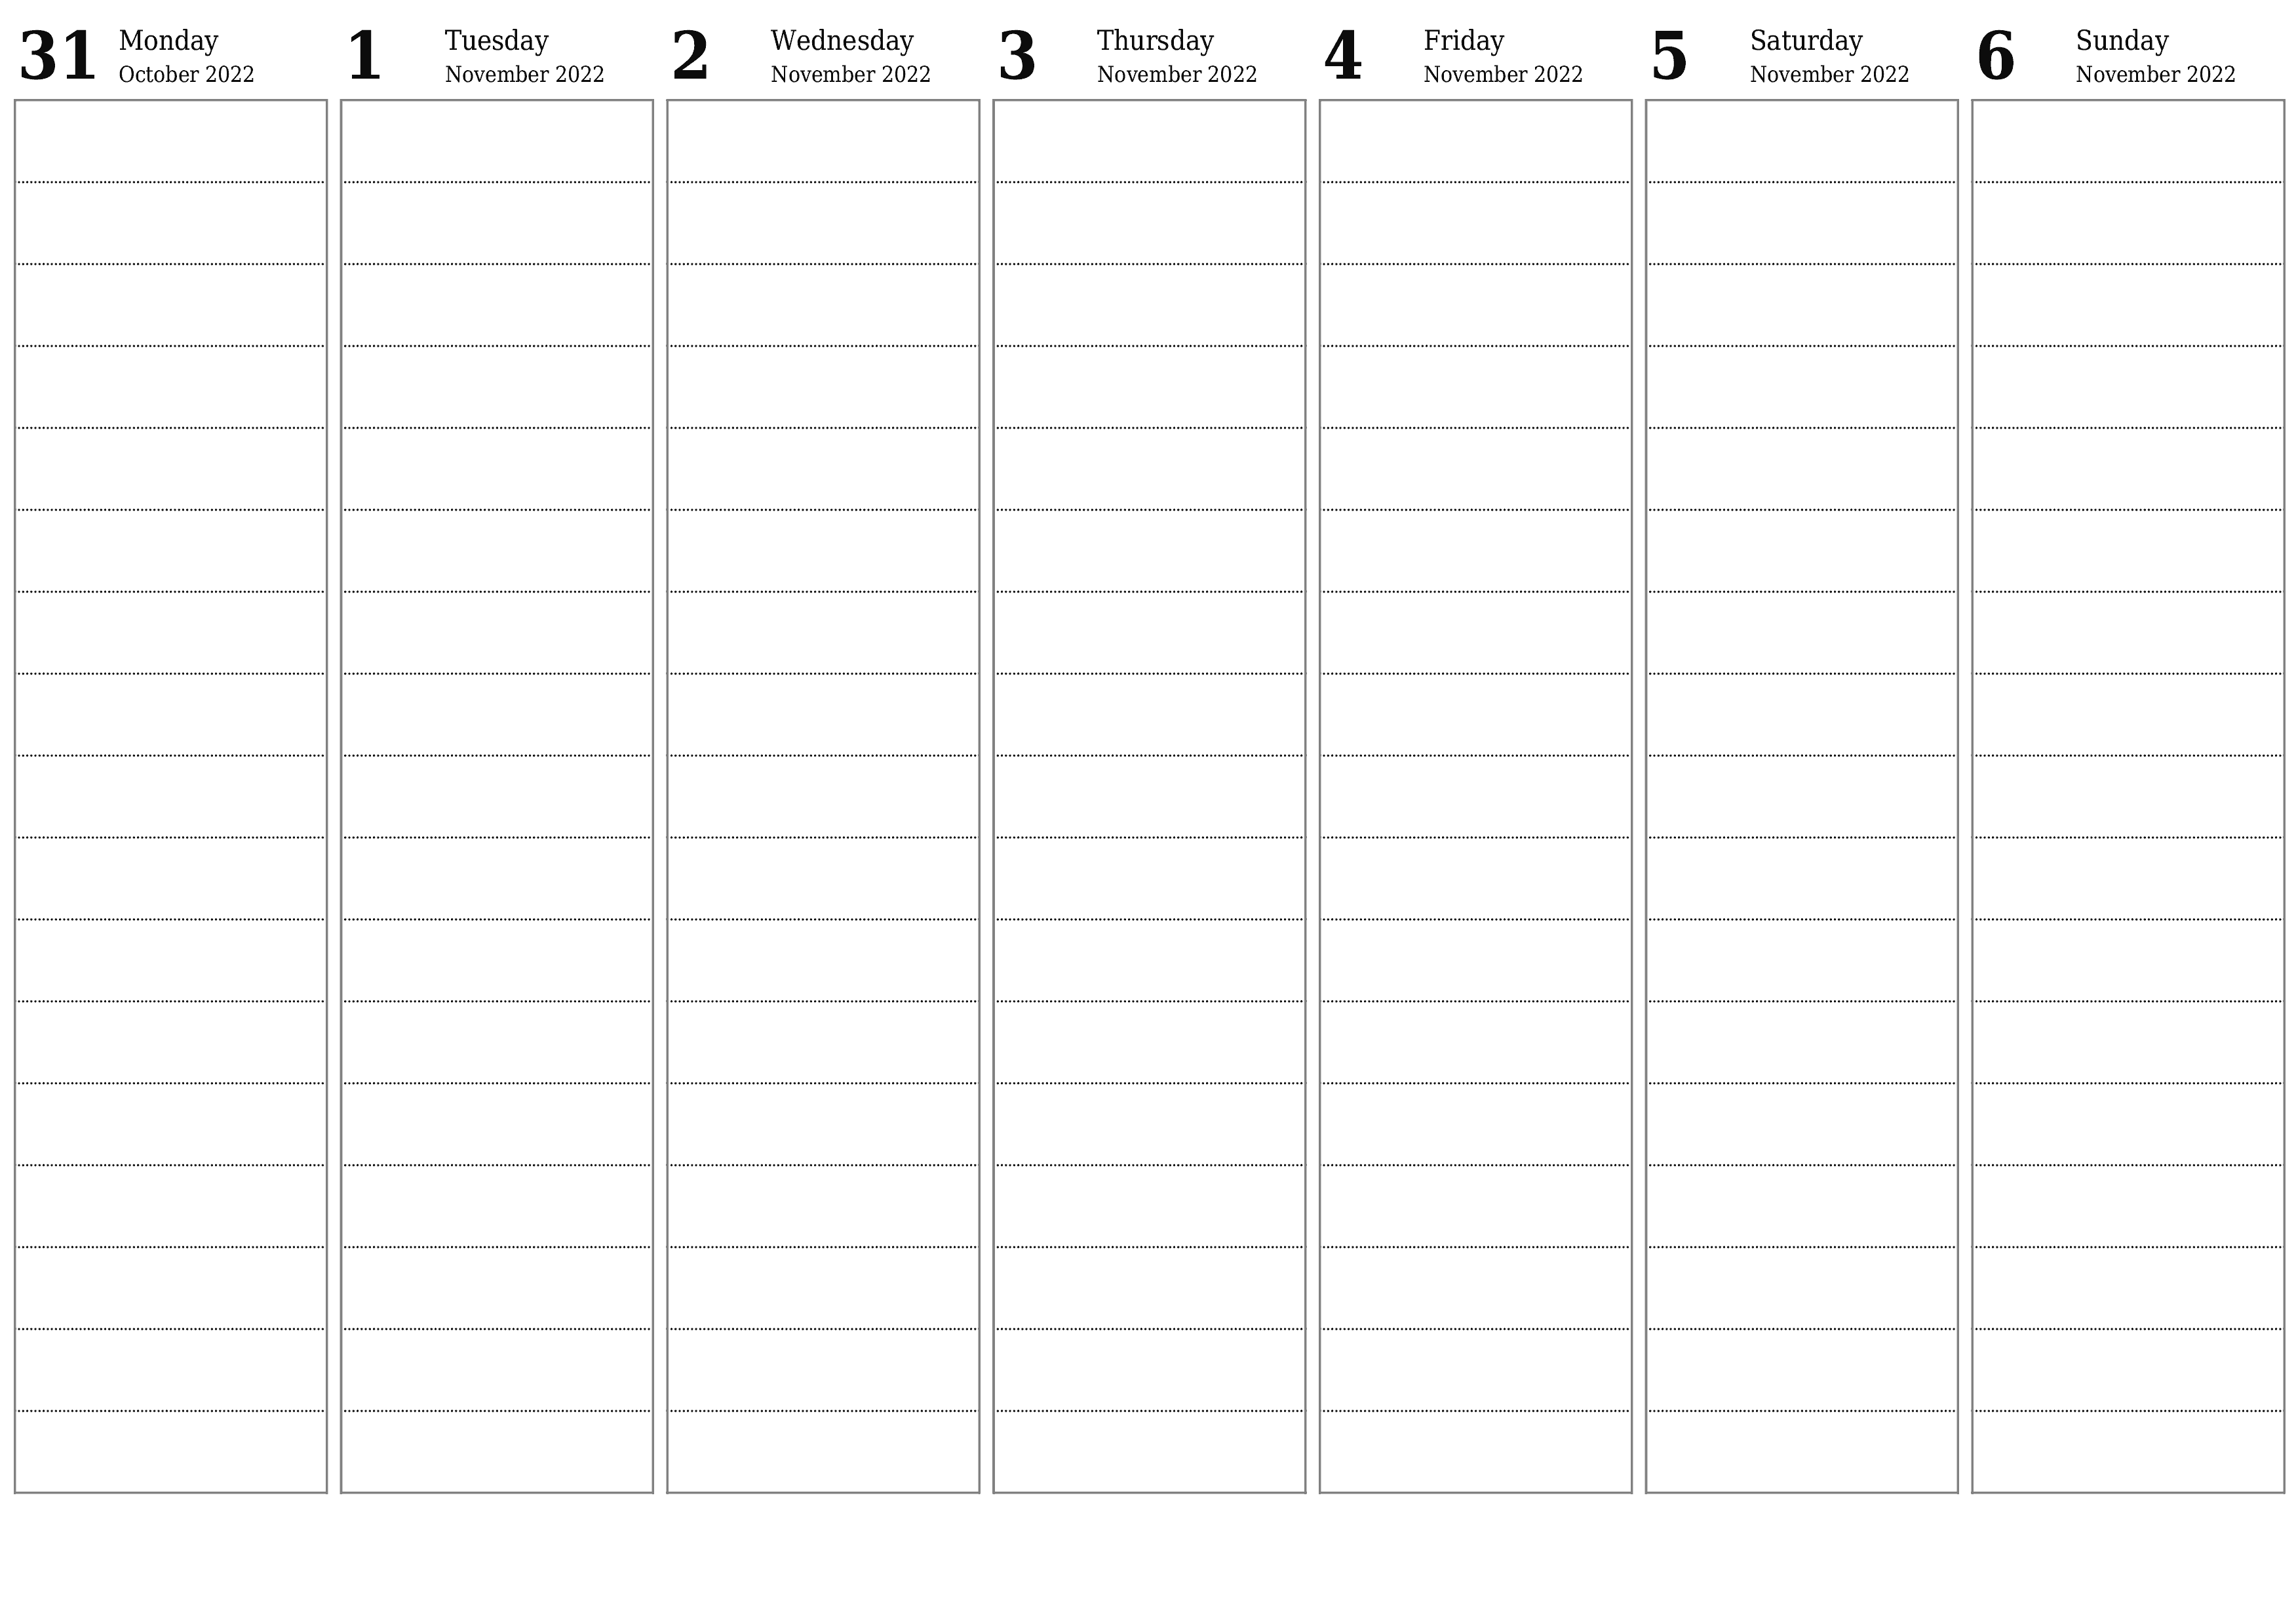 Blank weekly printable calendar and planner for week November 2022 with notes, save and print to PDF PNG English - 7calendar.com